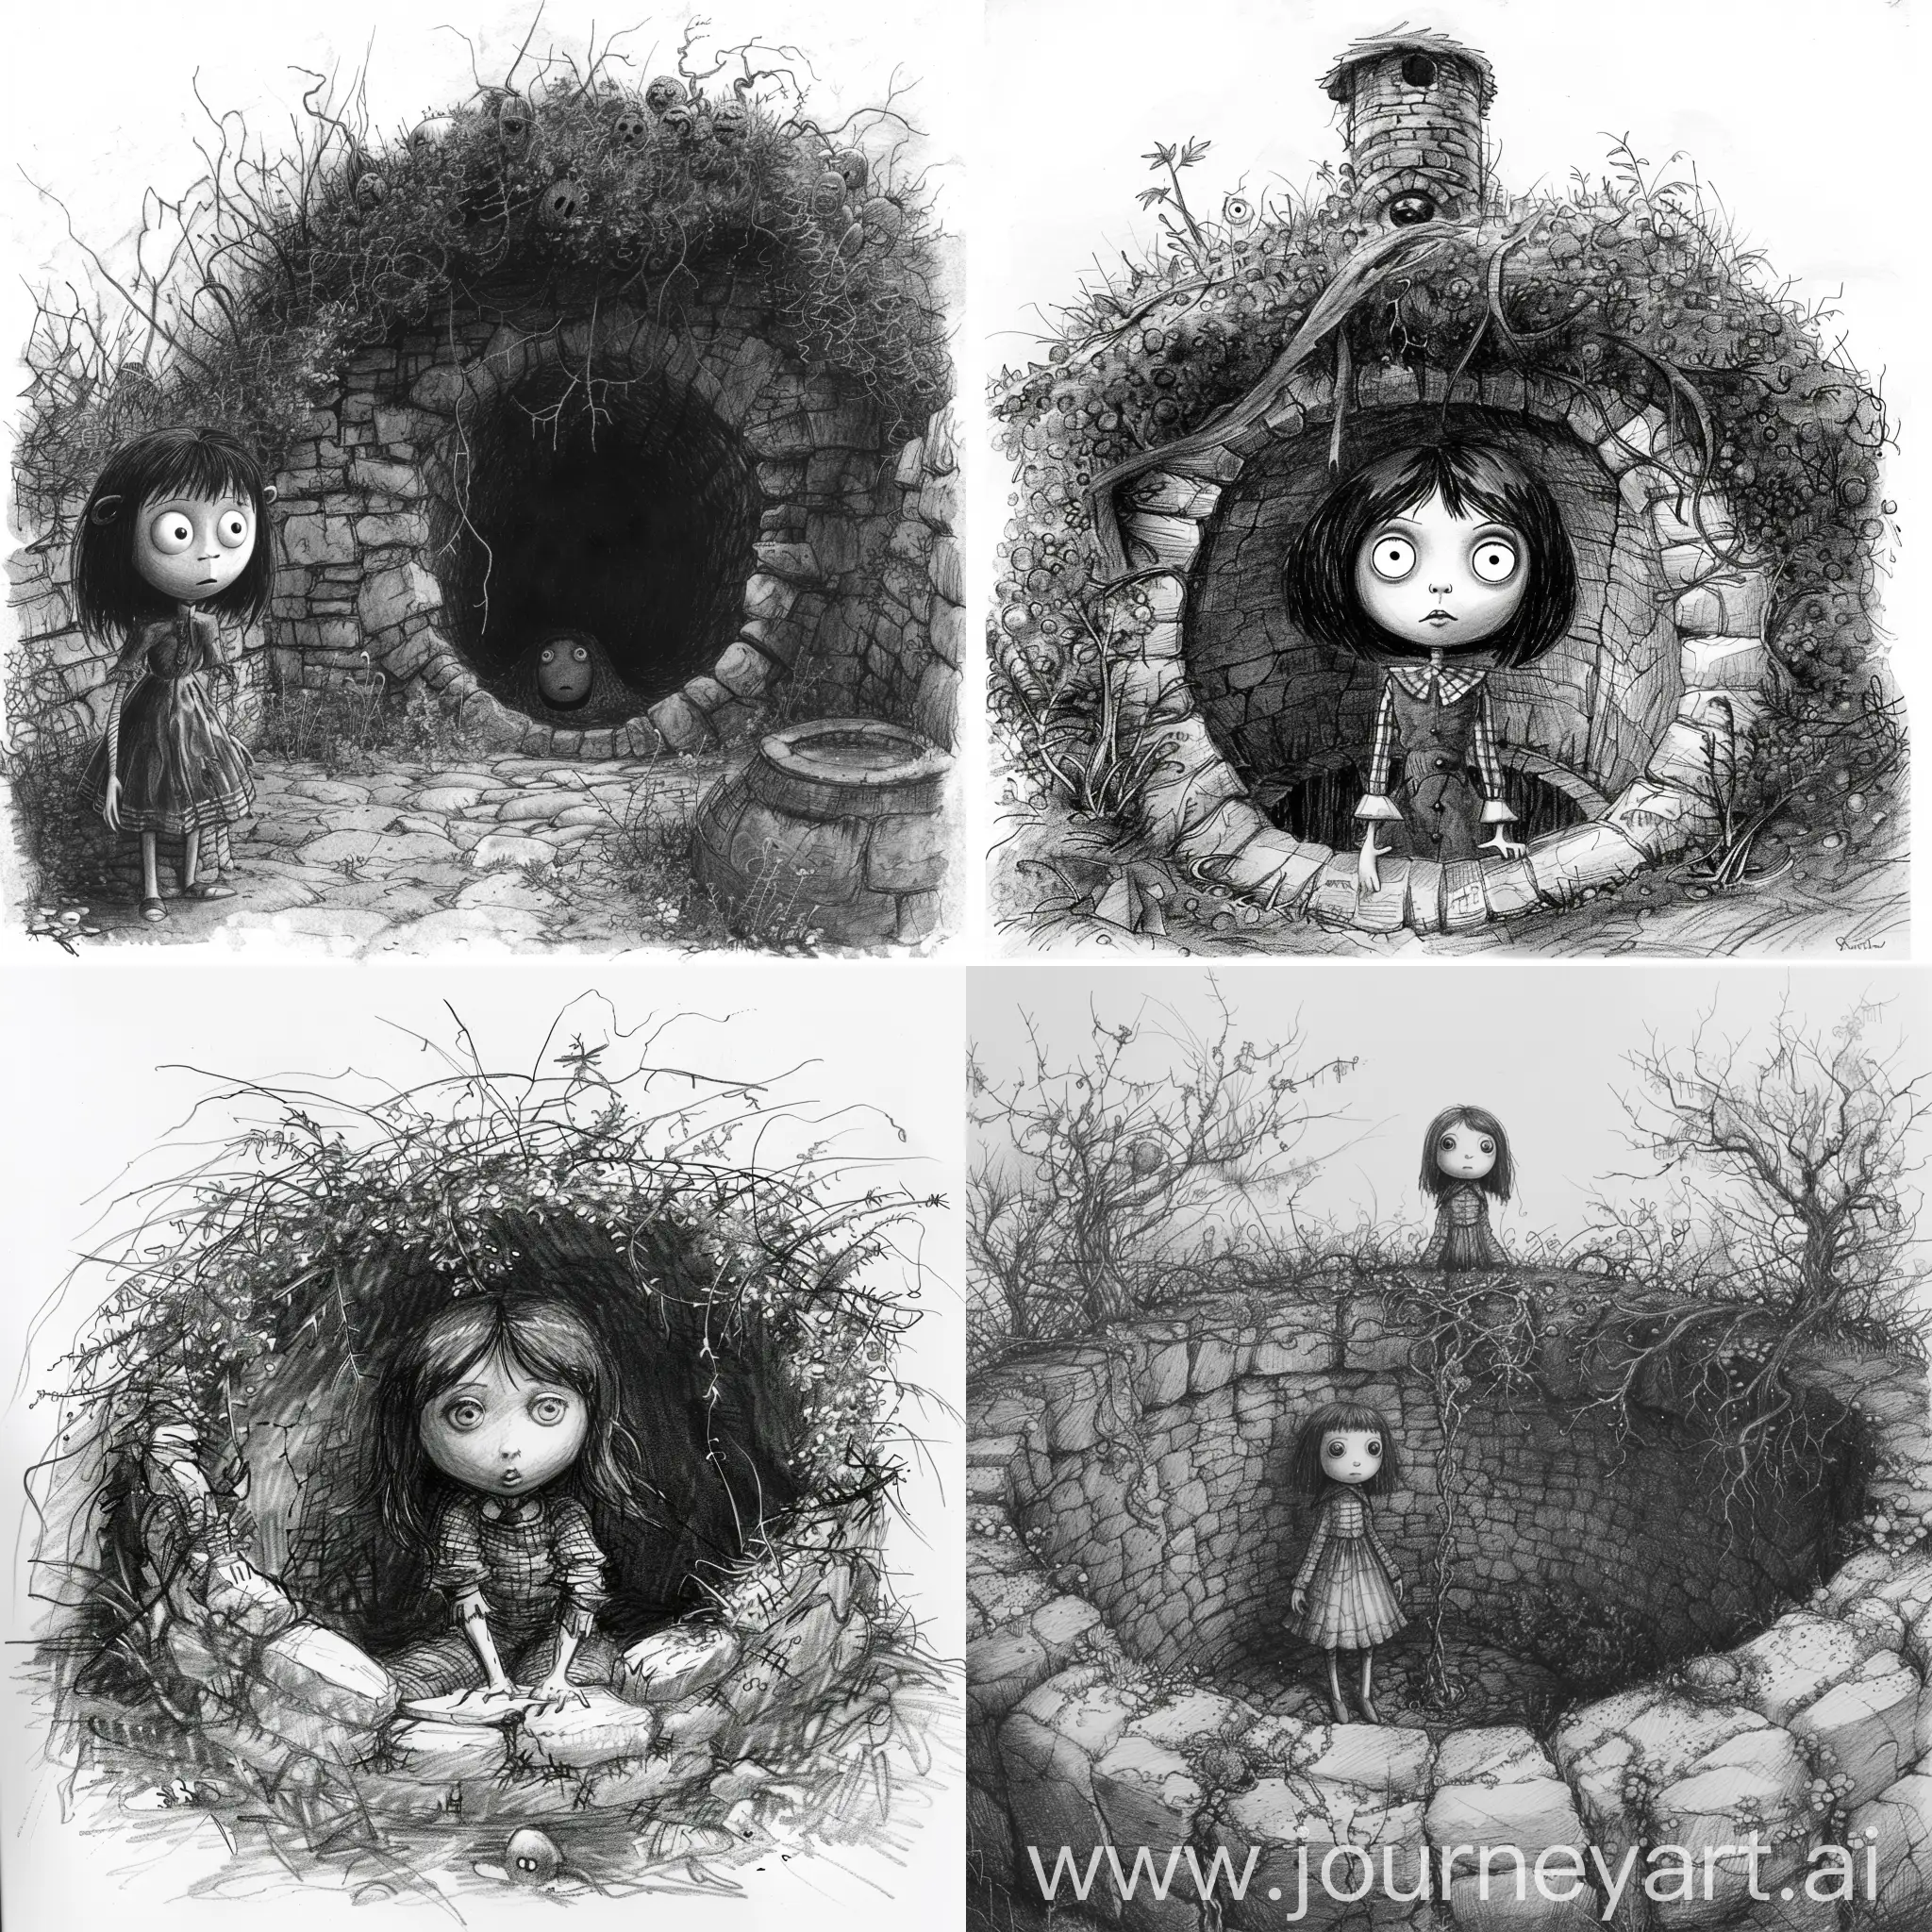 Coraline-in-Nightmarish-Landscape-Pencil-Sketches-by-the-Old-Overgrown-Well